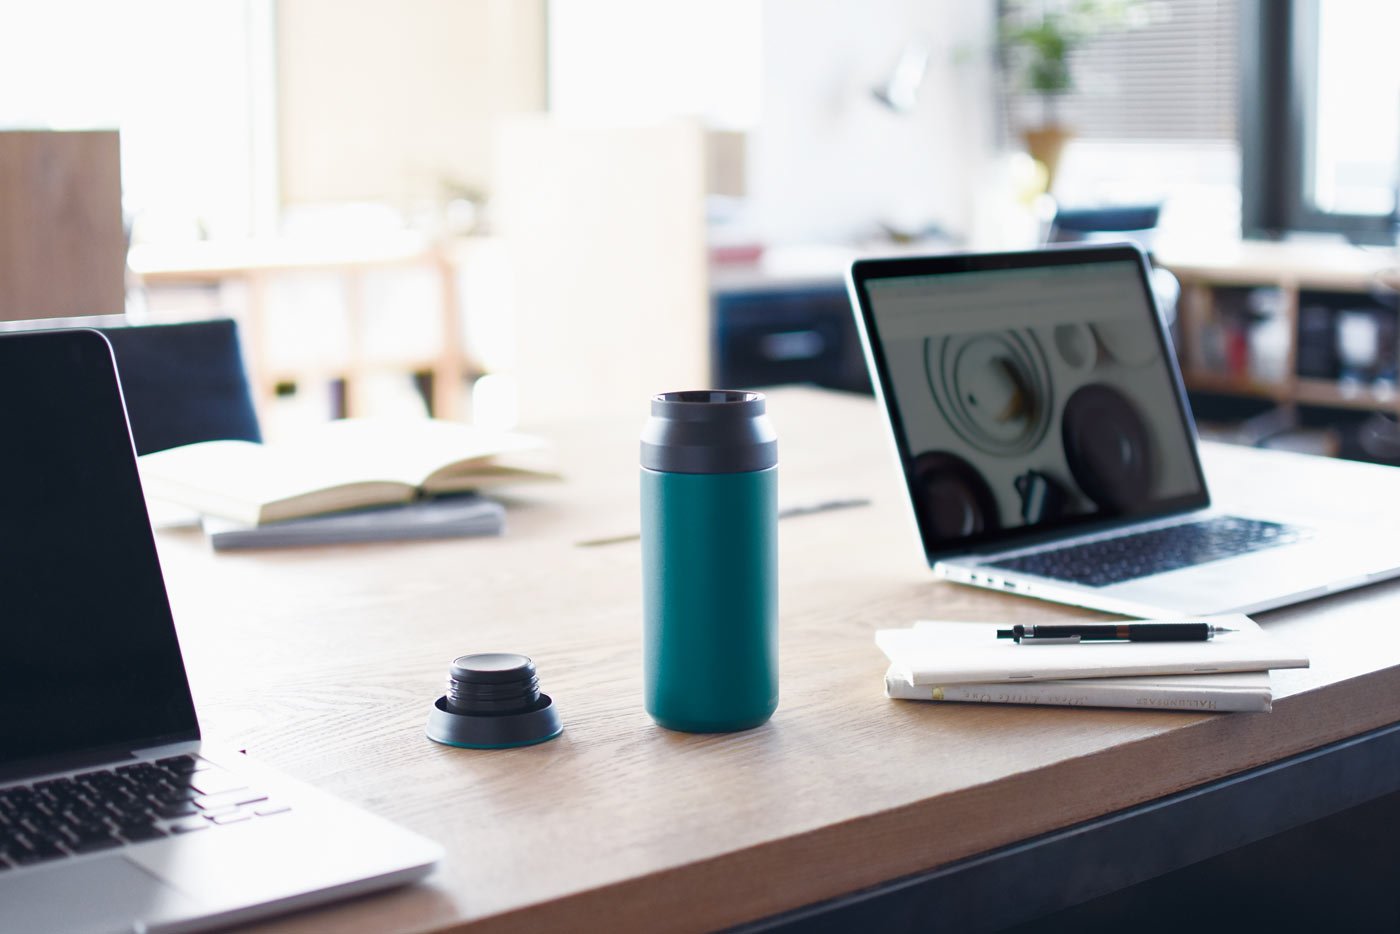  TRAVEL tumbler 500ml in turquoise on a desk with laptops  